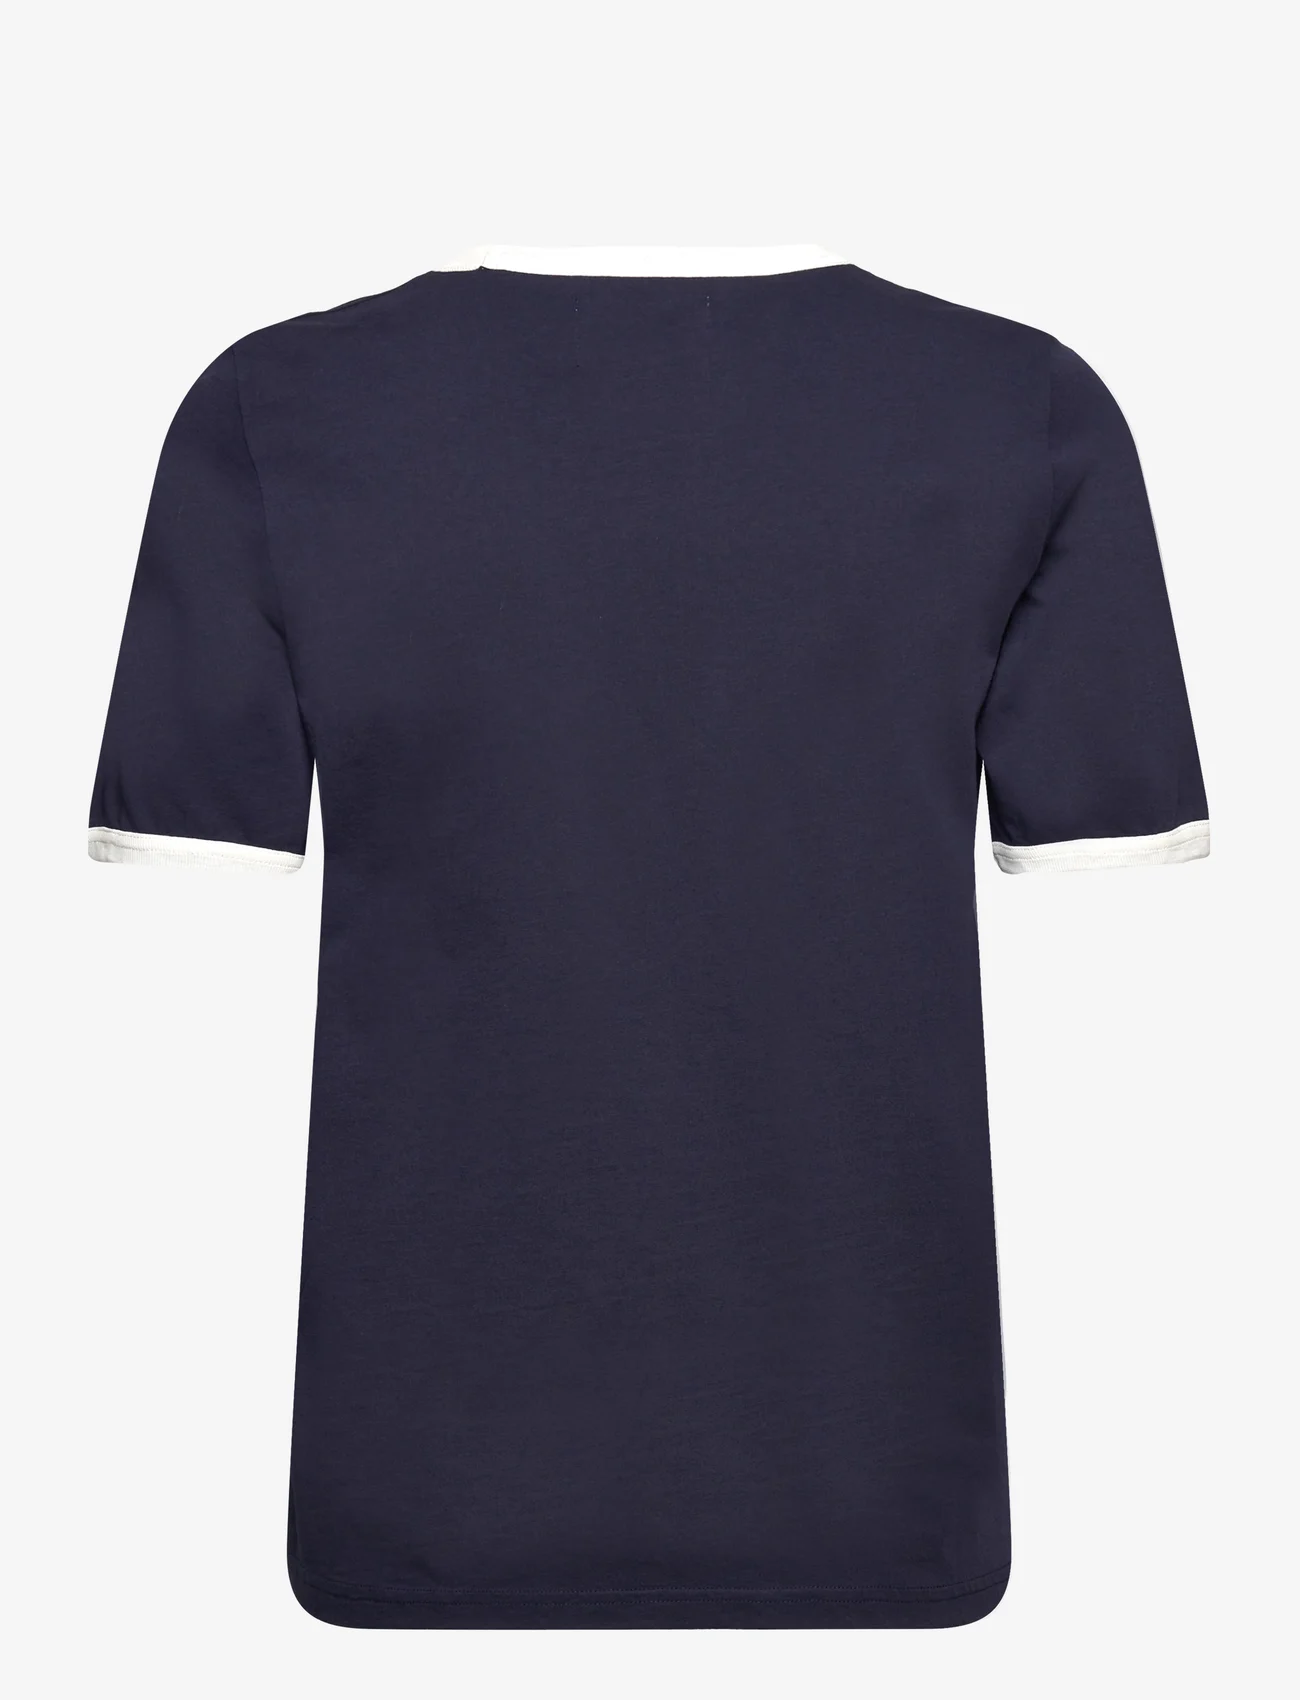 Double A by Wood Wood - Fia stacked logo T-shirt - t-shirts - navy - 1